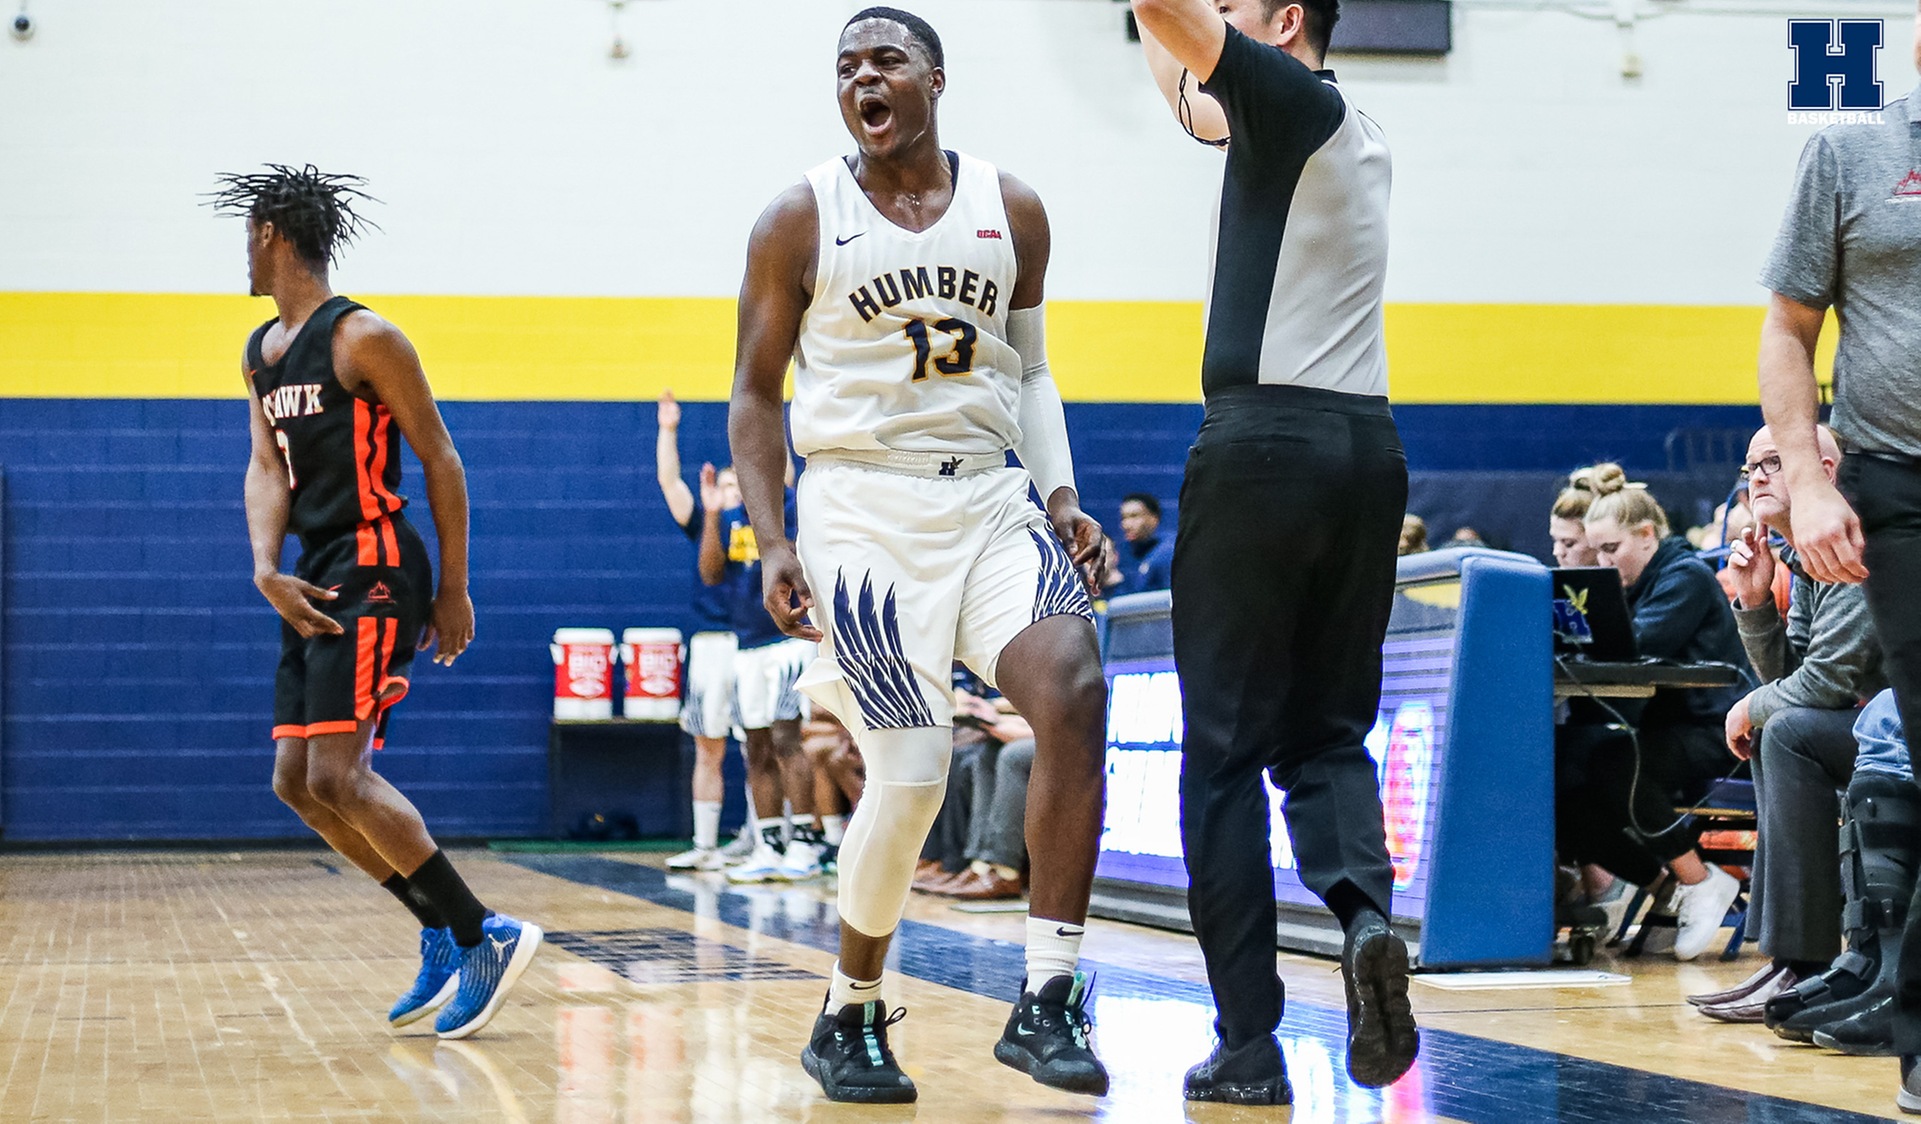 Morgan's Career Night Leads Men's Basketball to Tenth Straight Win